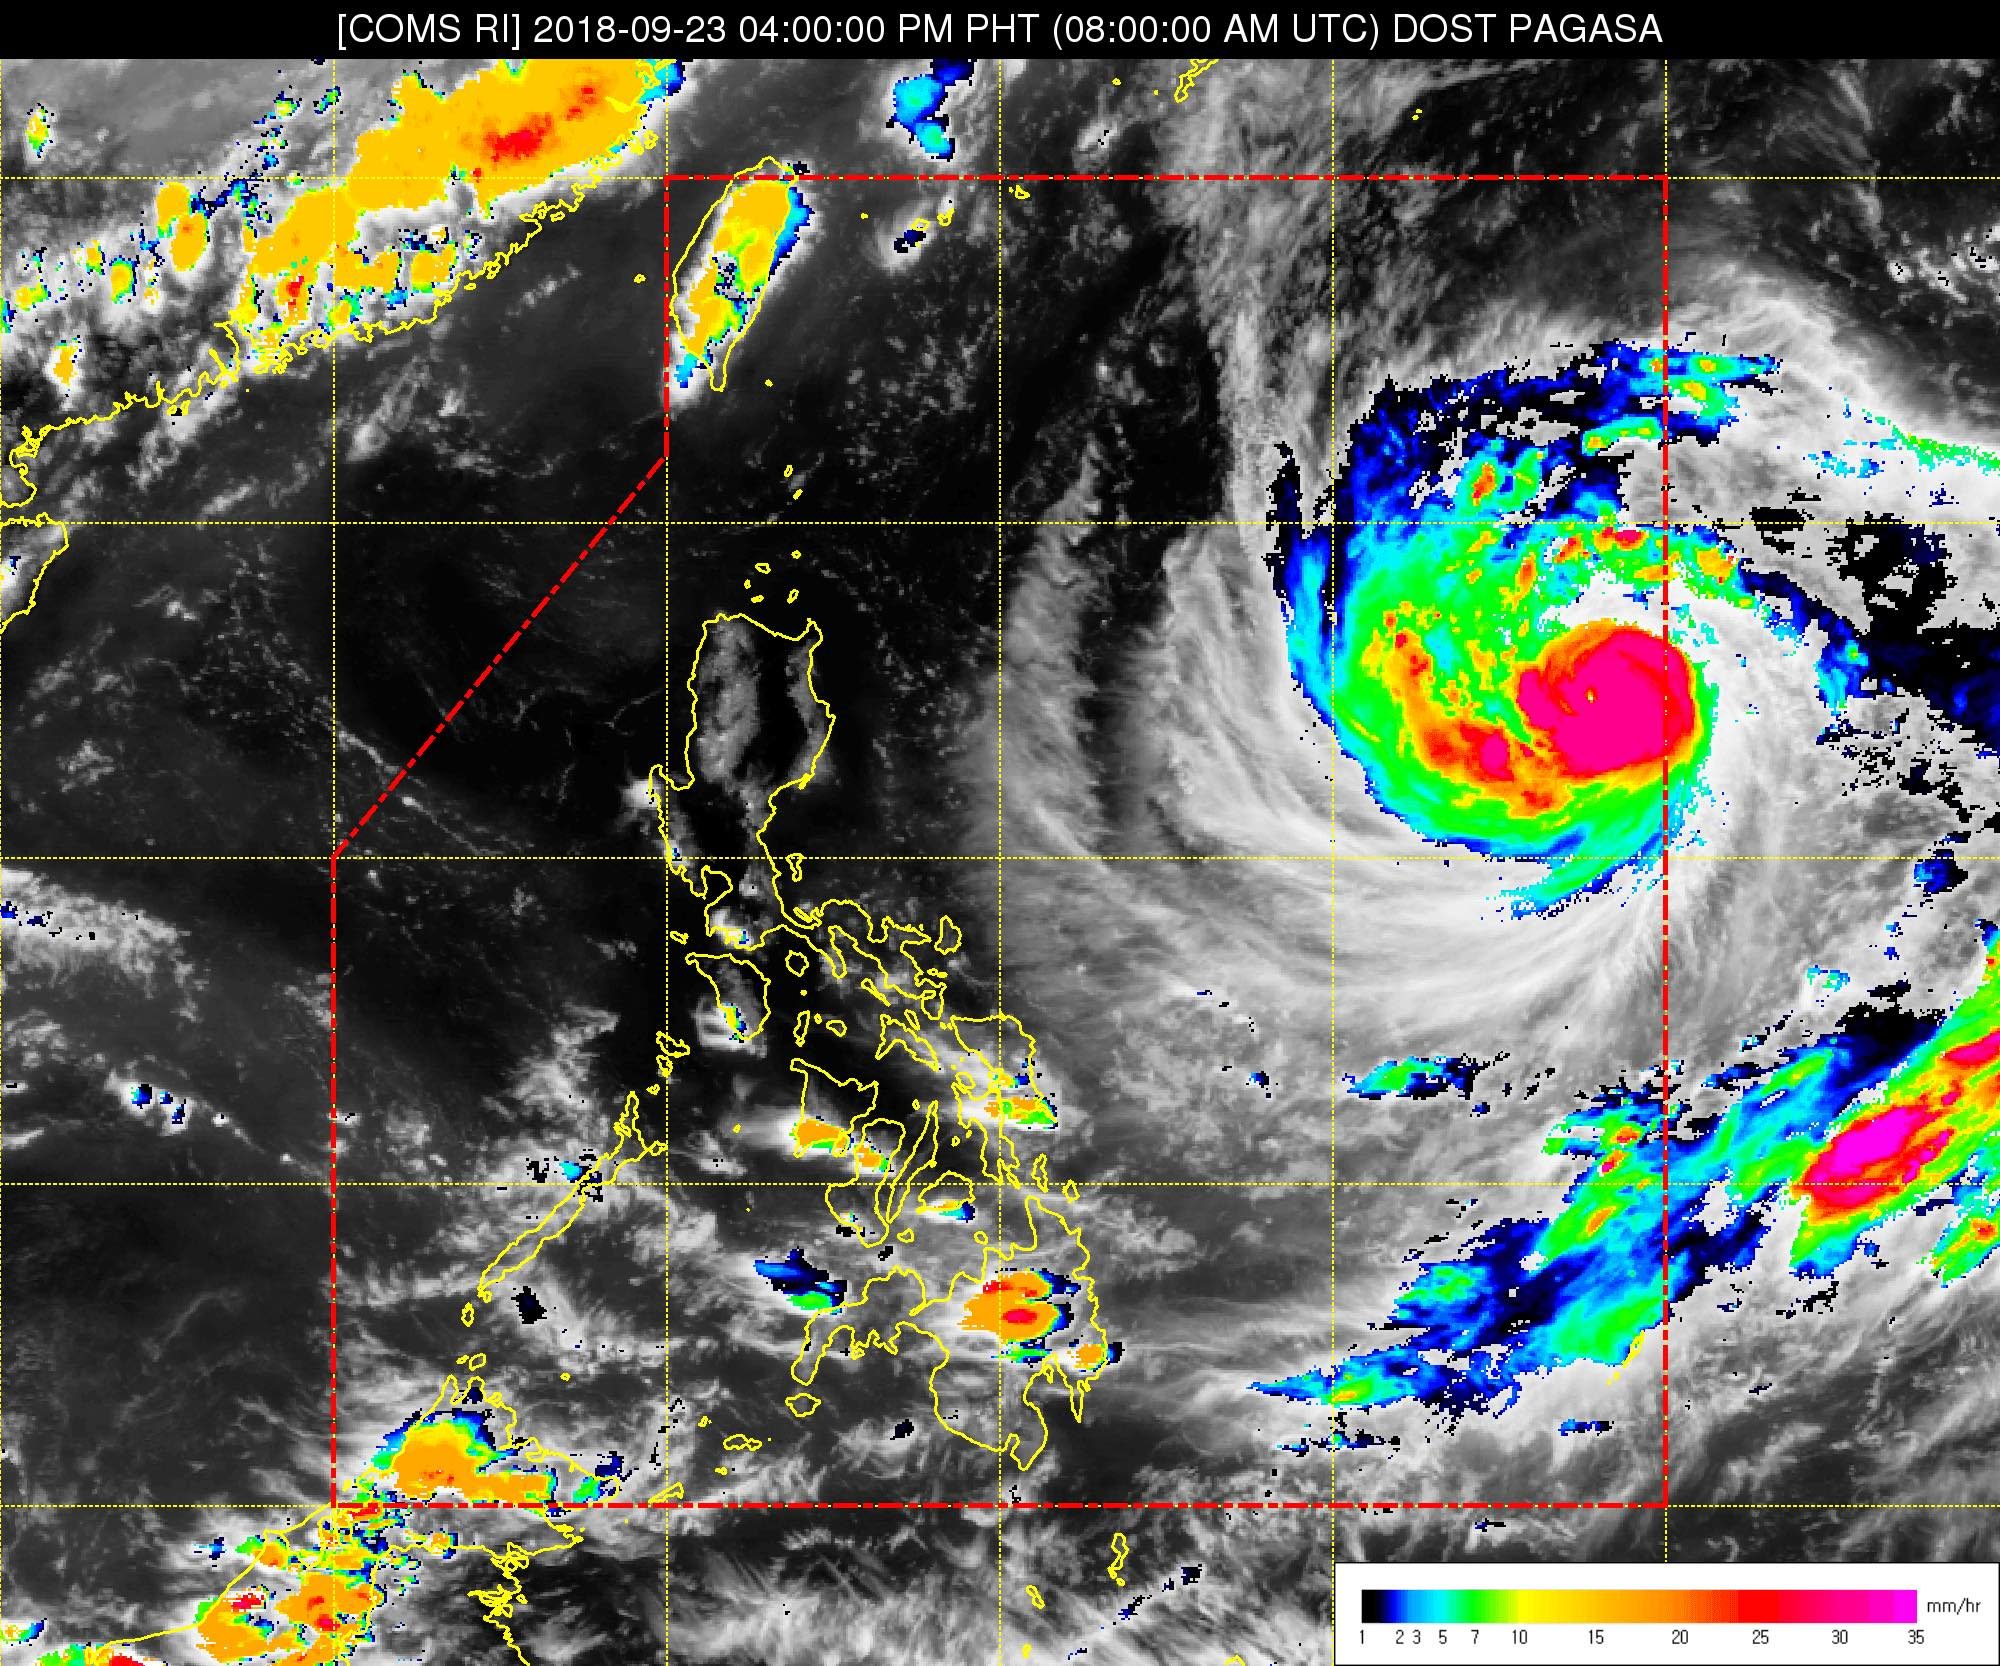 Typhoon Paeng now in PAR, landfall unlikely